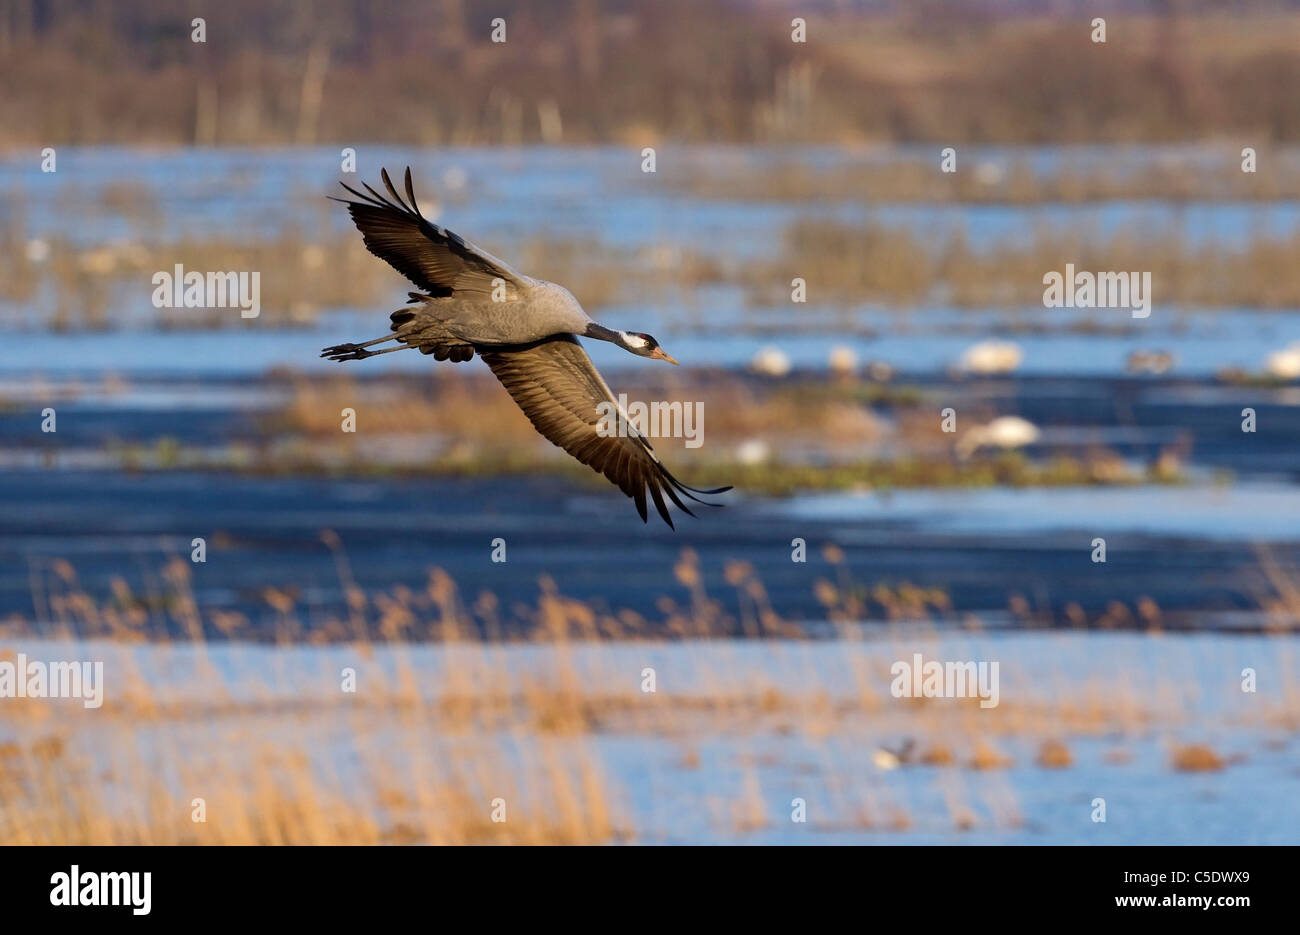 View of a crane in flight at HornborgasjÃ¶n against blurred background in Sweden Stock Photo